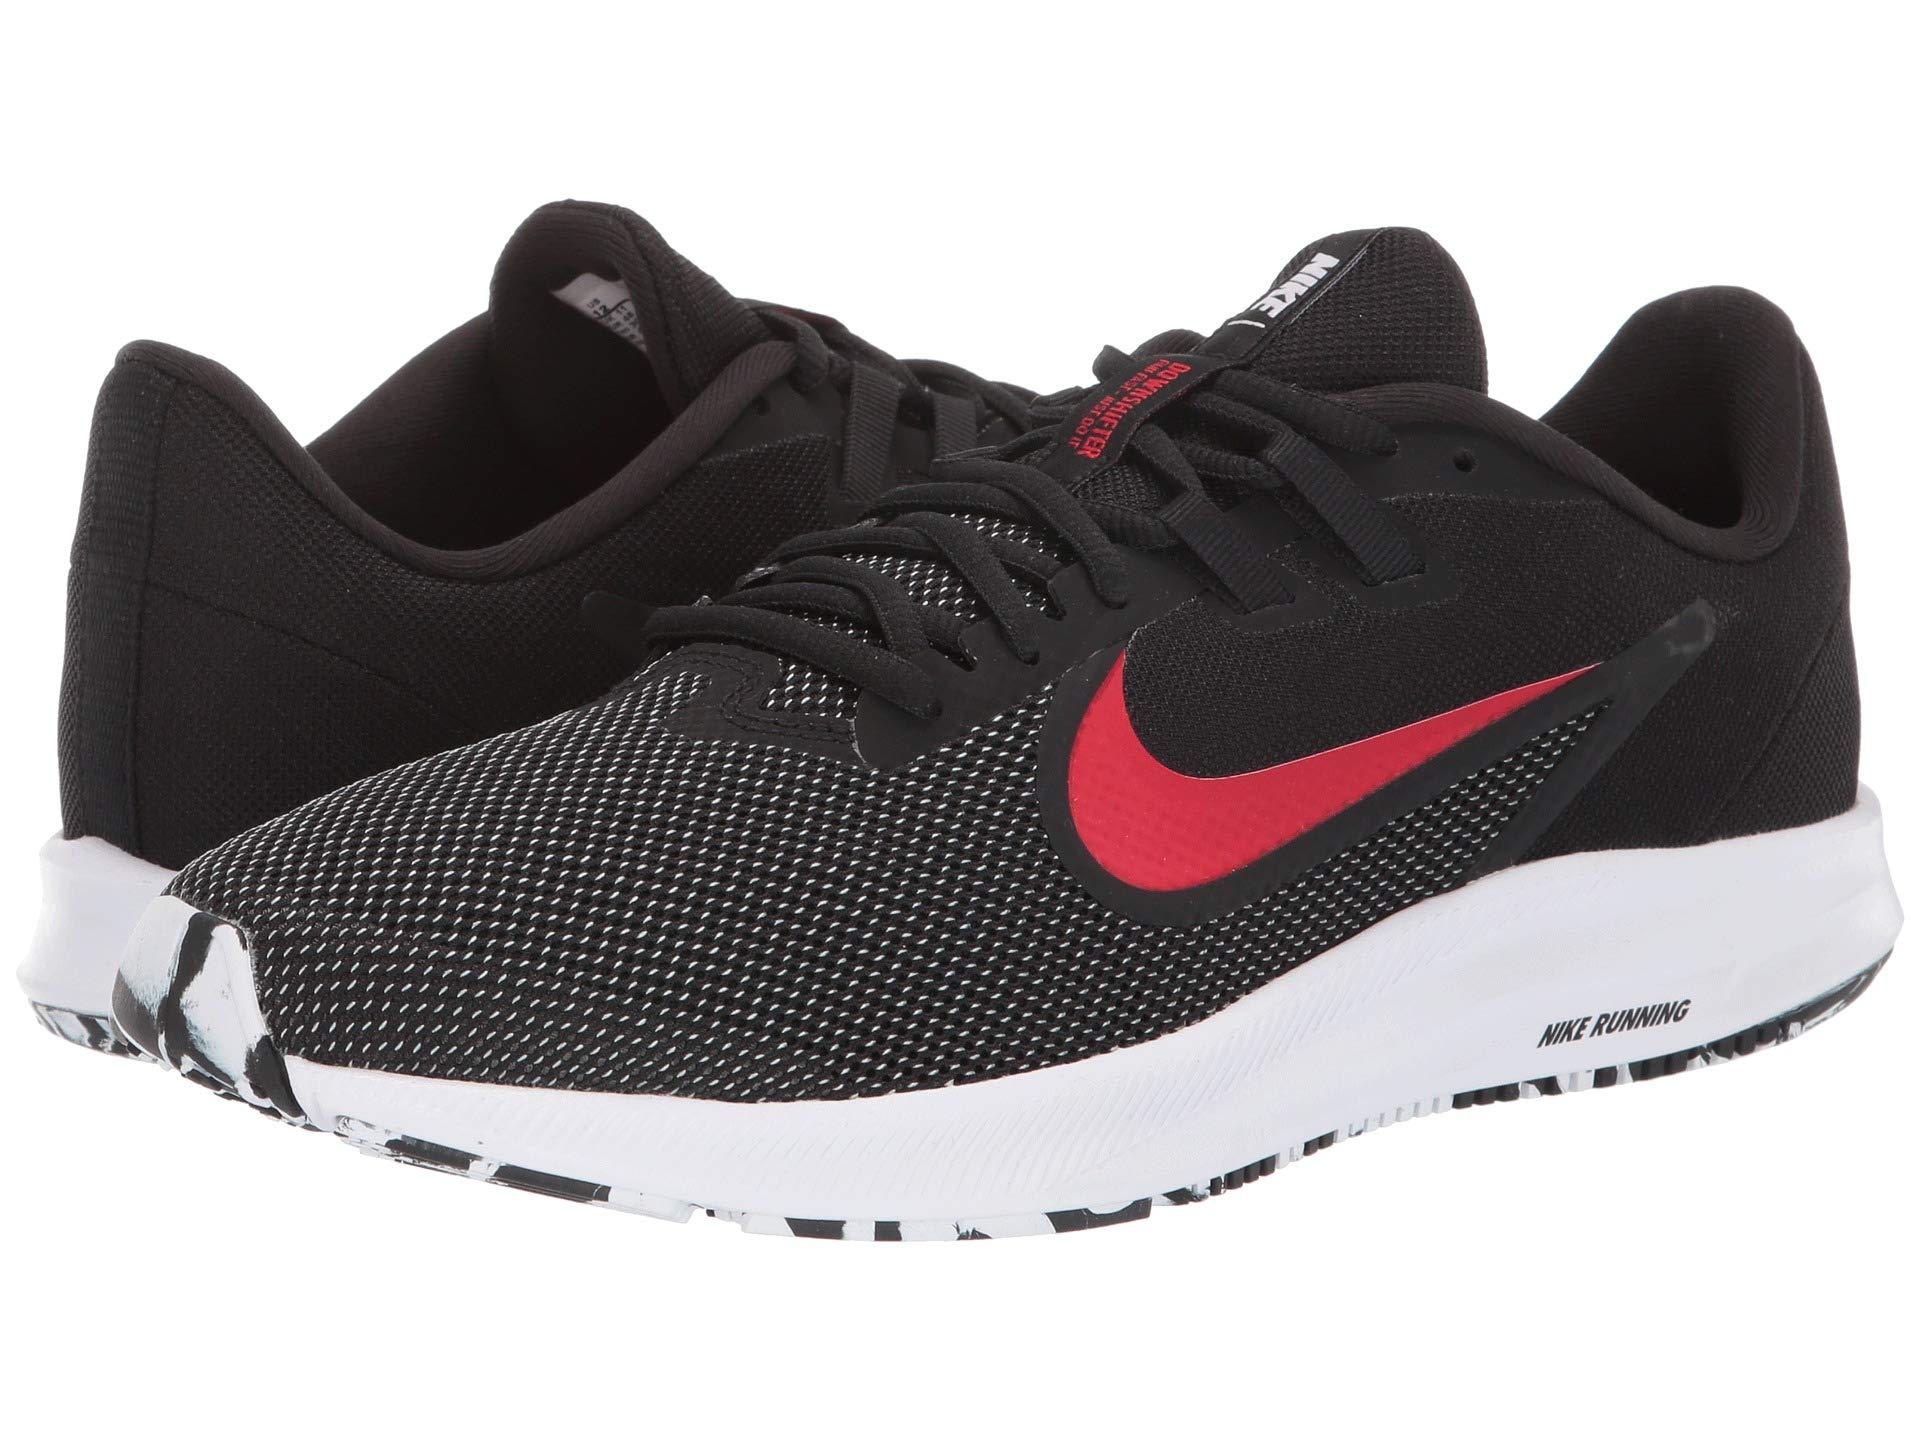 Nike Rubber Downshifter 9 in Black/White - Anthracite - Cool (Black ...